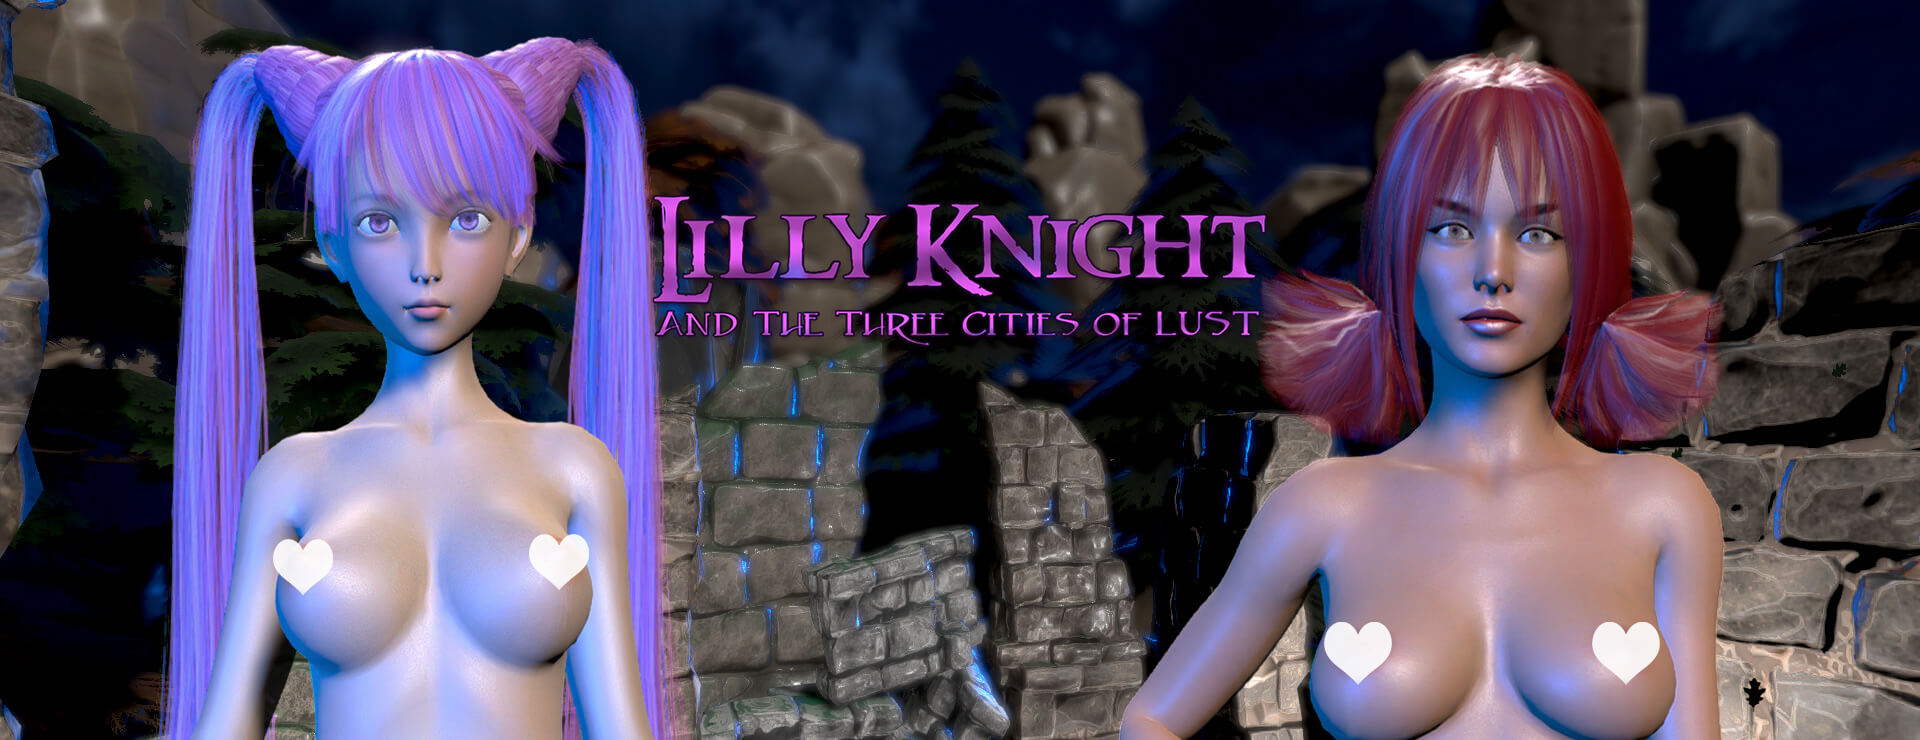 Lilly Knight and the Three Cities of Lust - Action Adventure Spiel